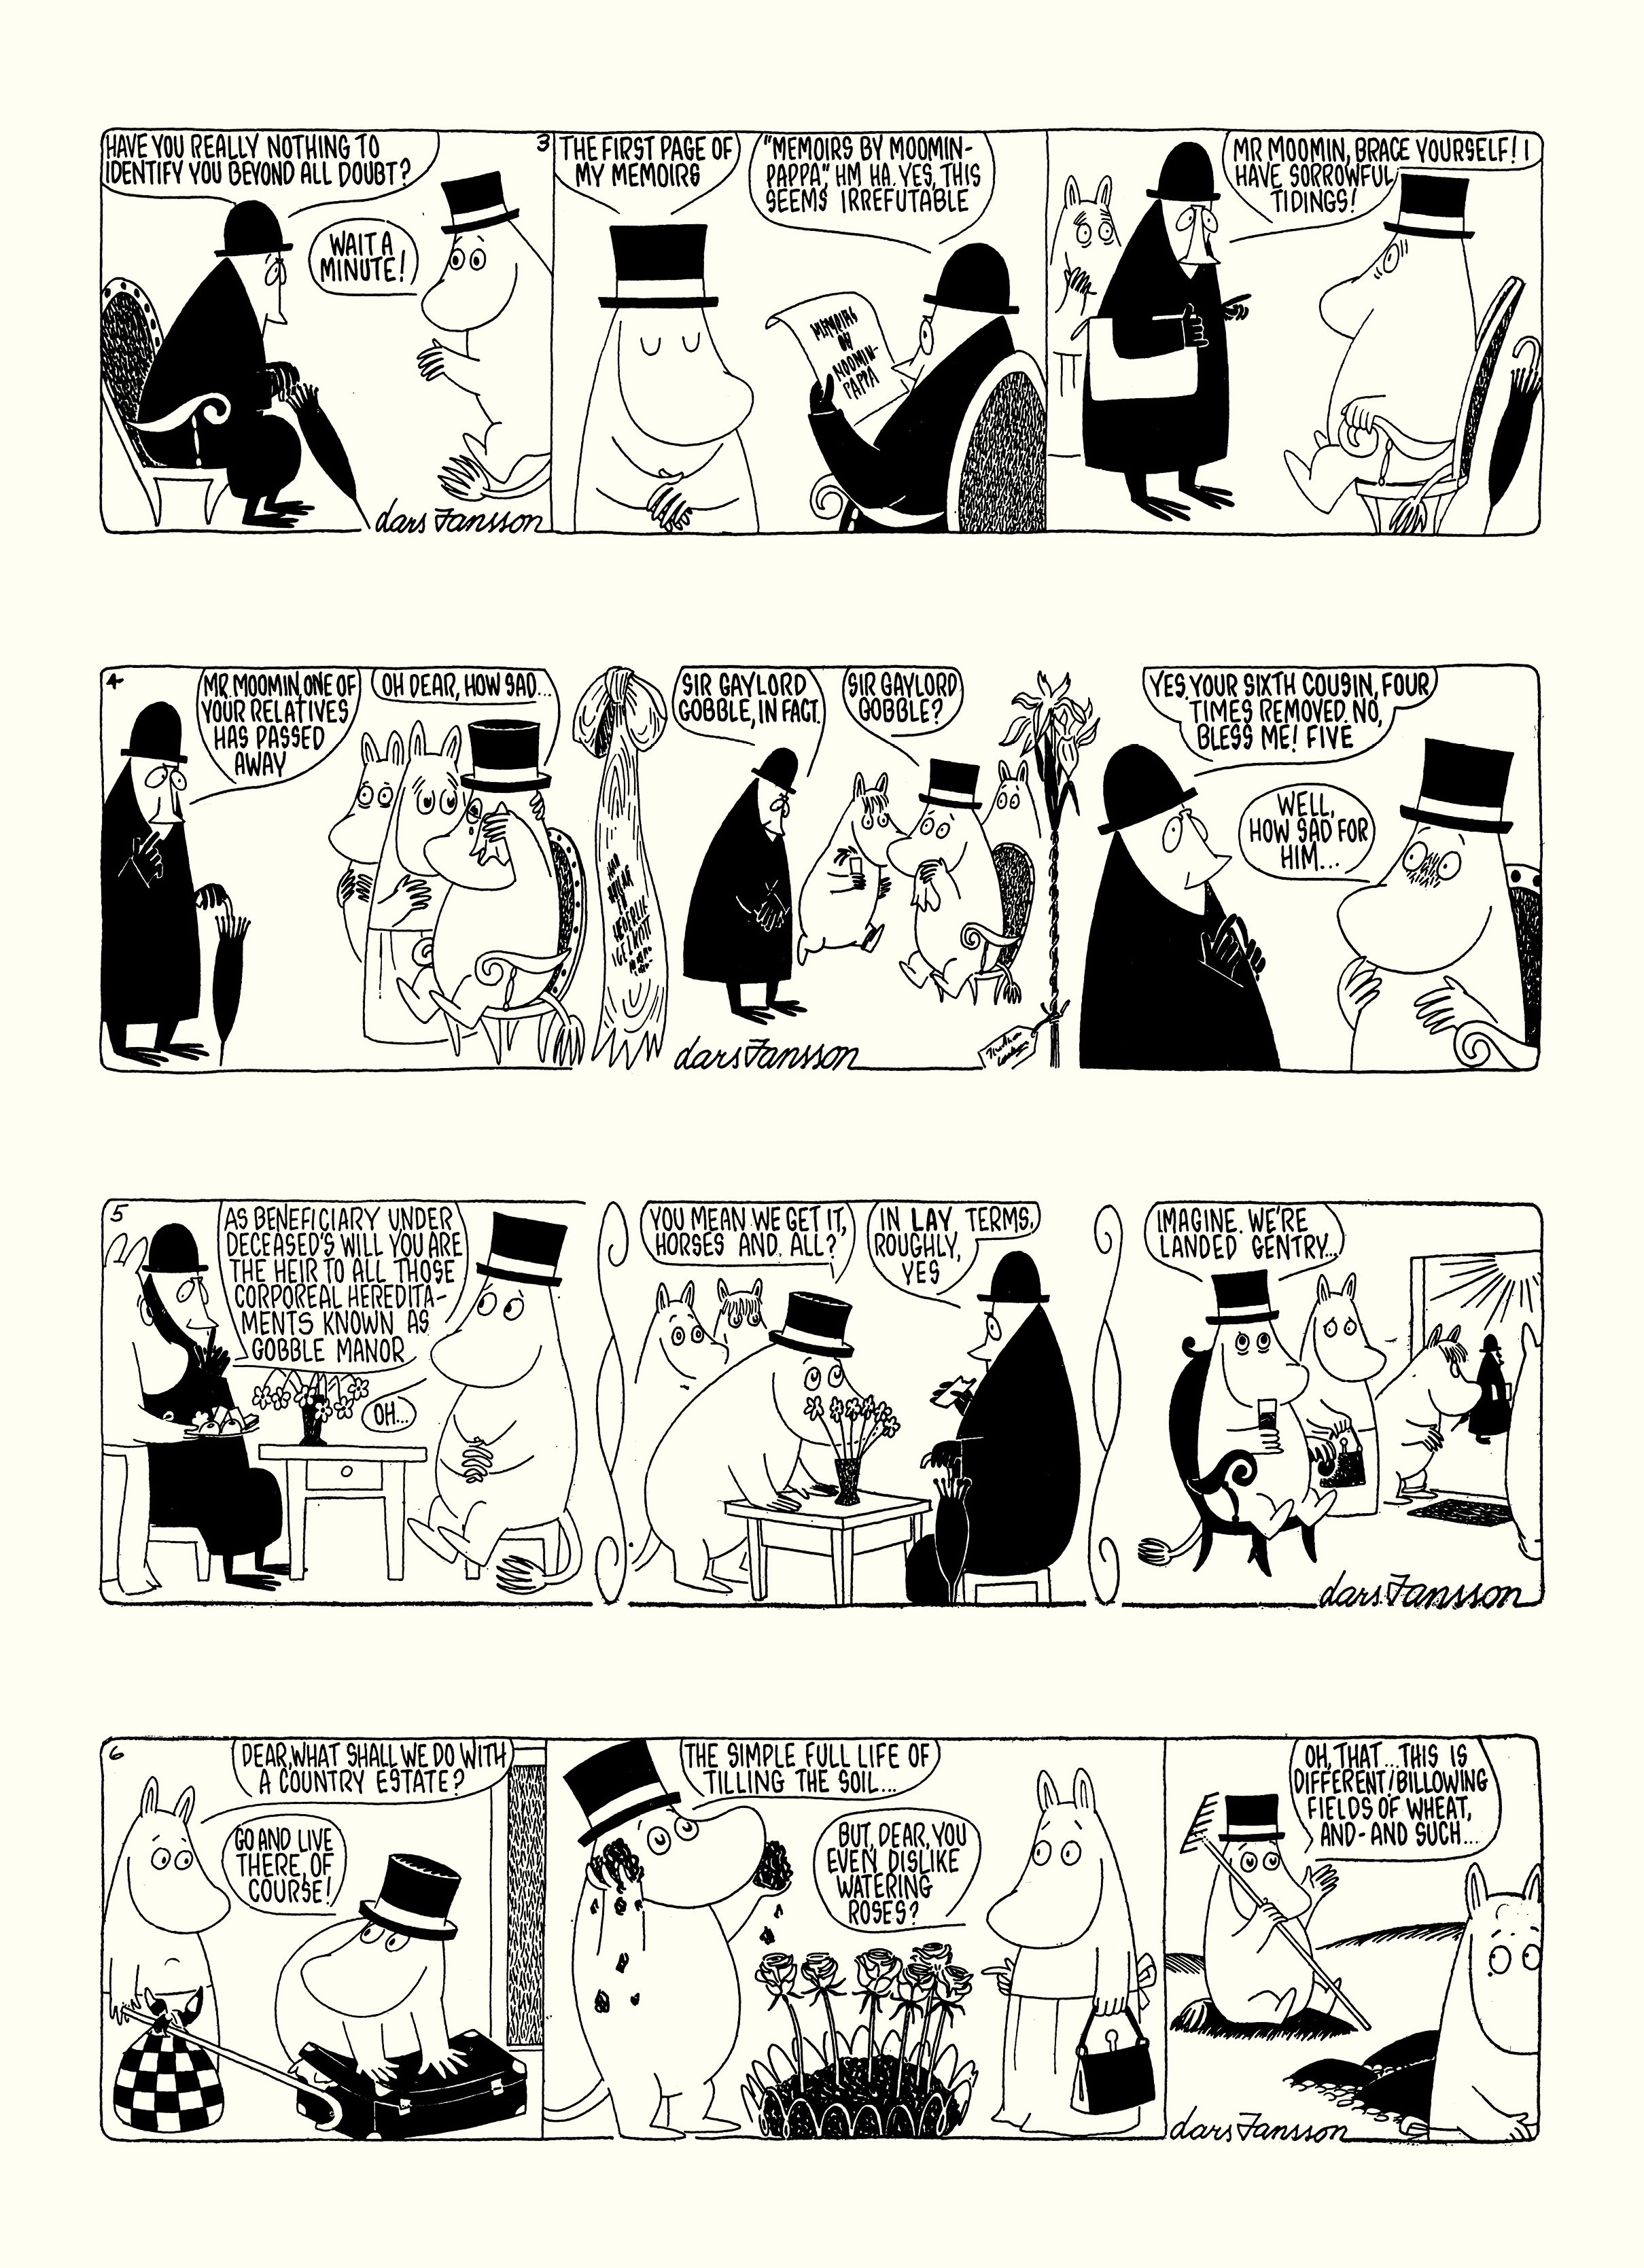 Read online Moomin: The Complete Lars Jansson Comic Strip comic -  Issue # TPB 7 - 49